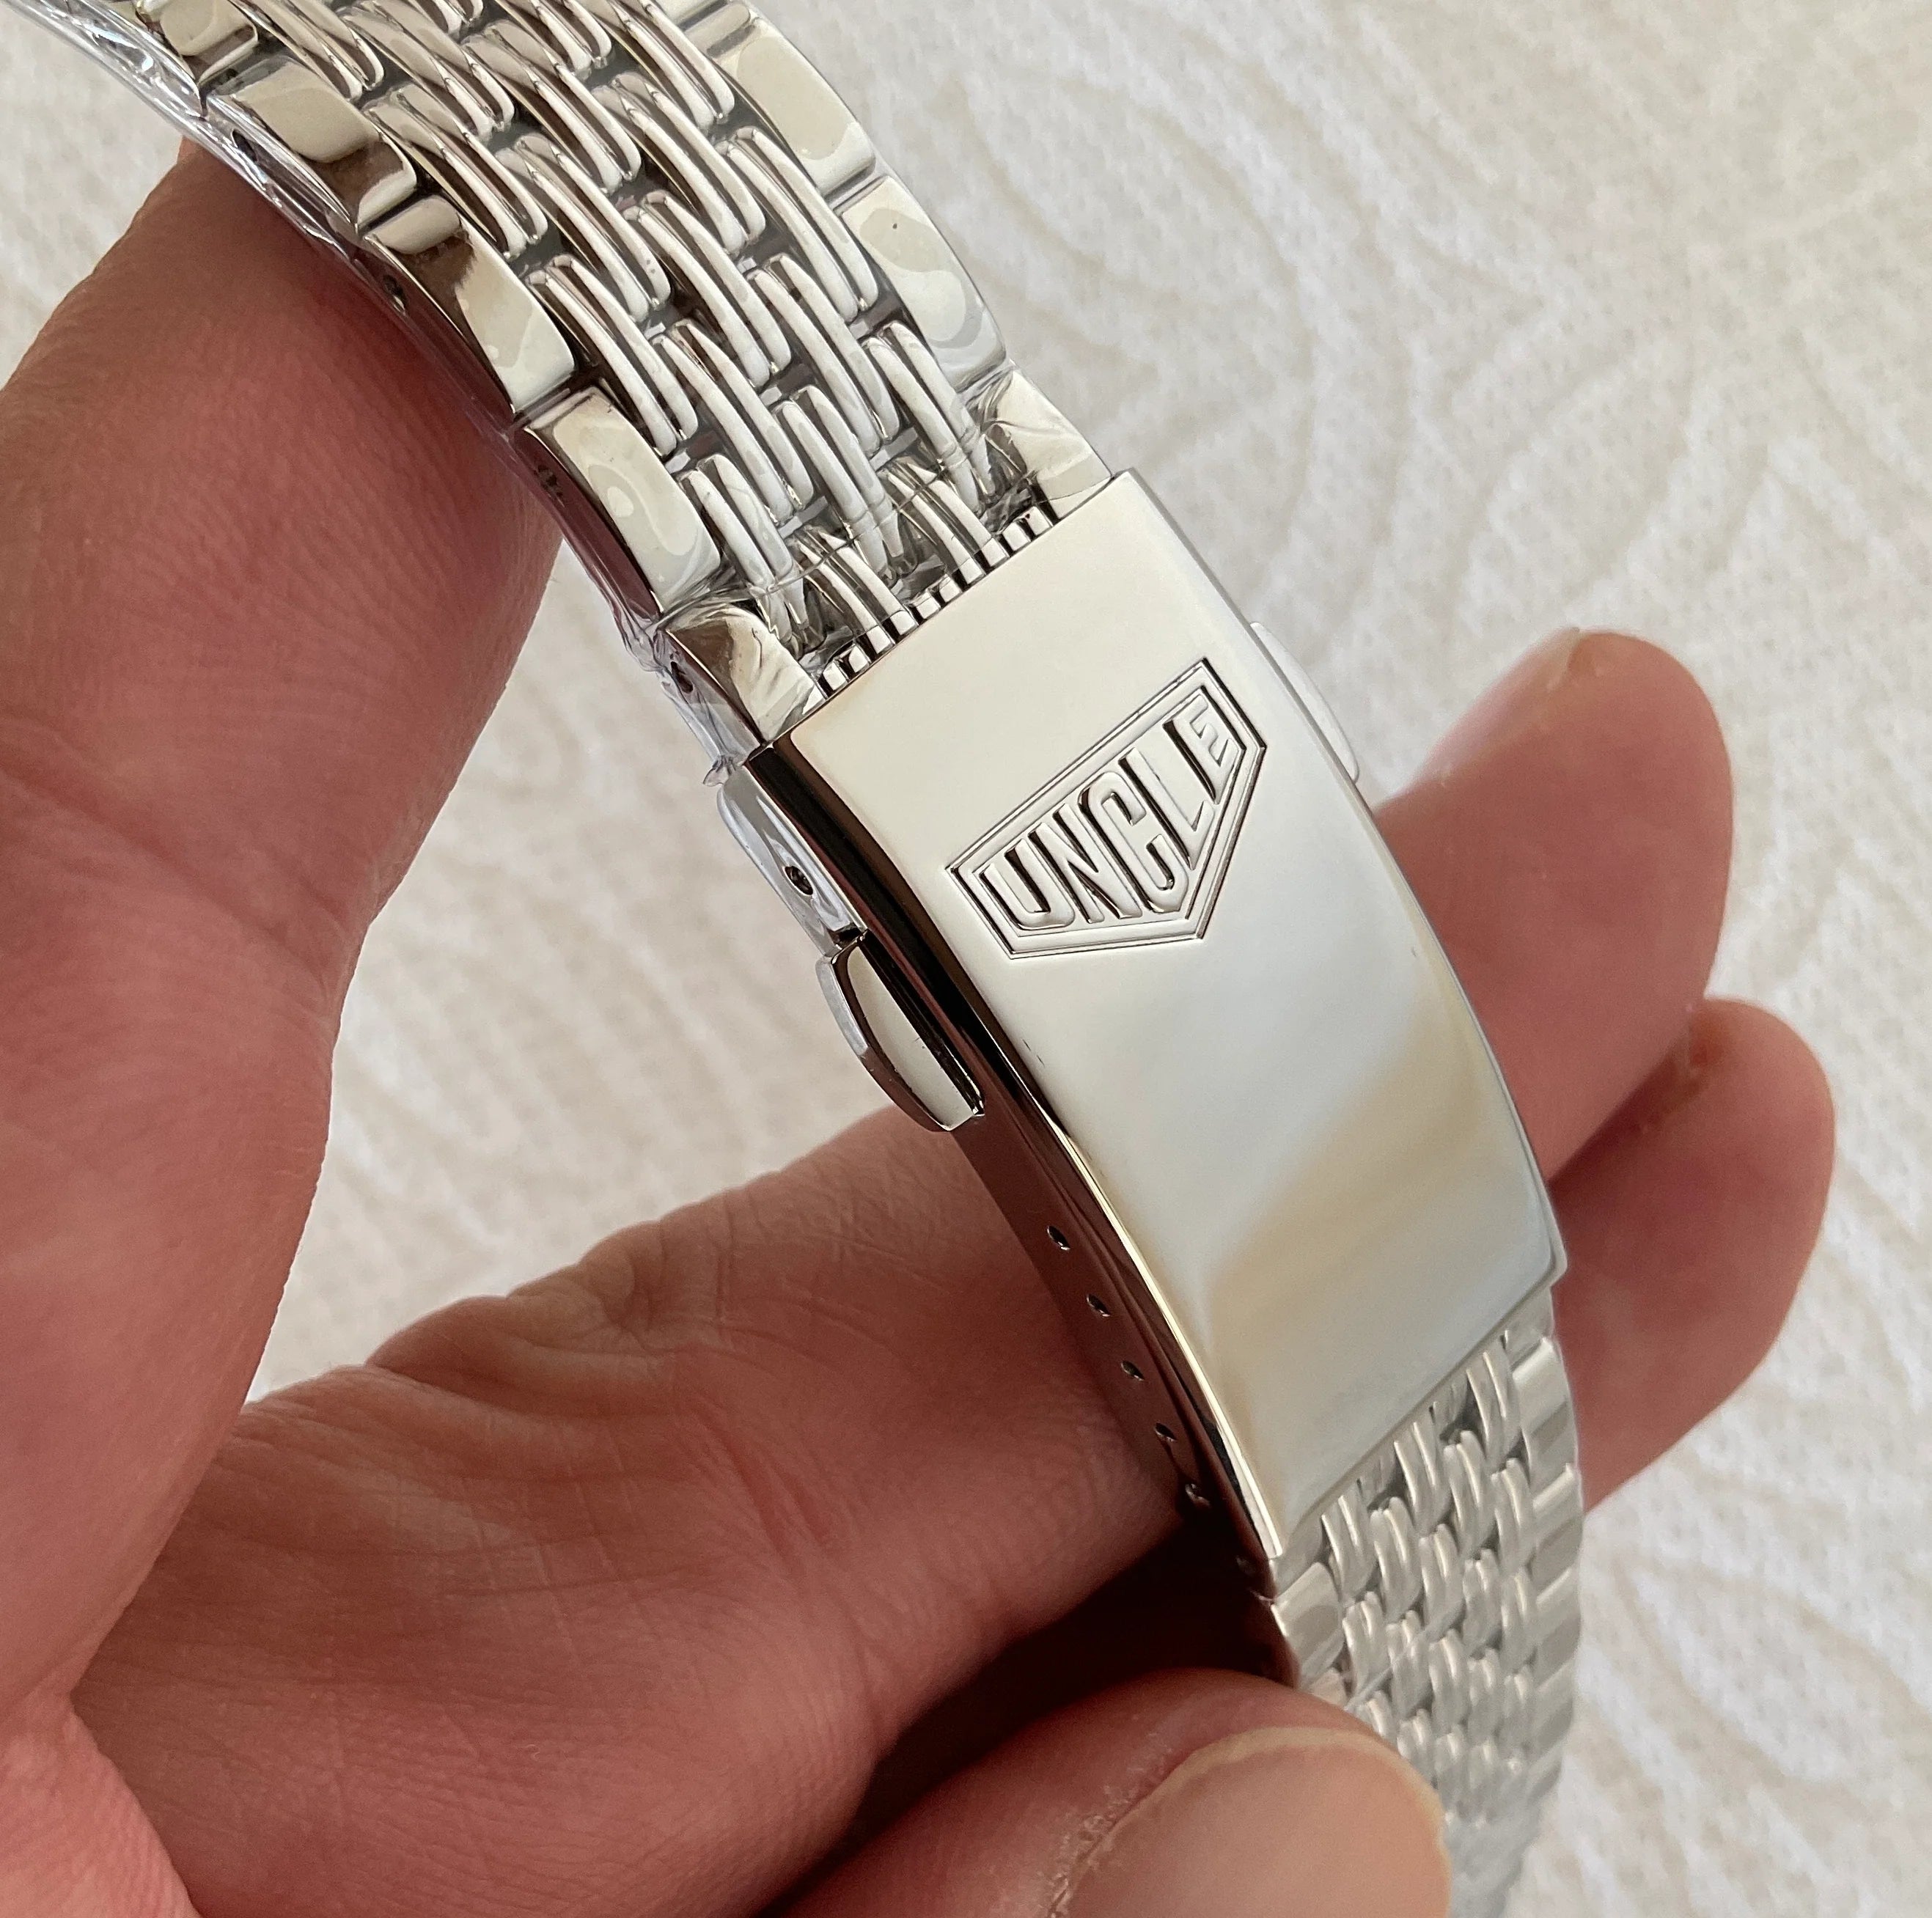 Watch Strap World - Tag Heuer Replacement Strap and Clasp | TAG Heuer Forums